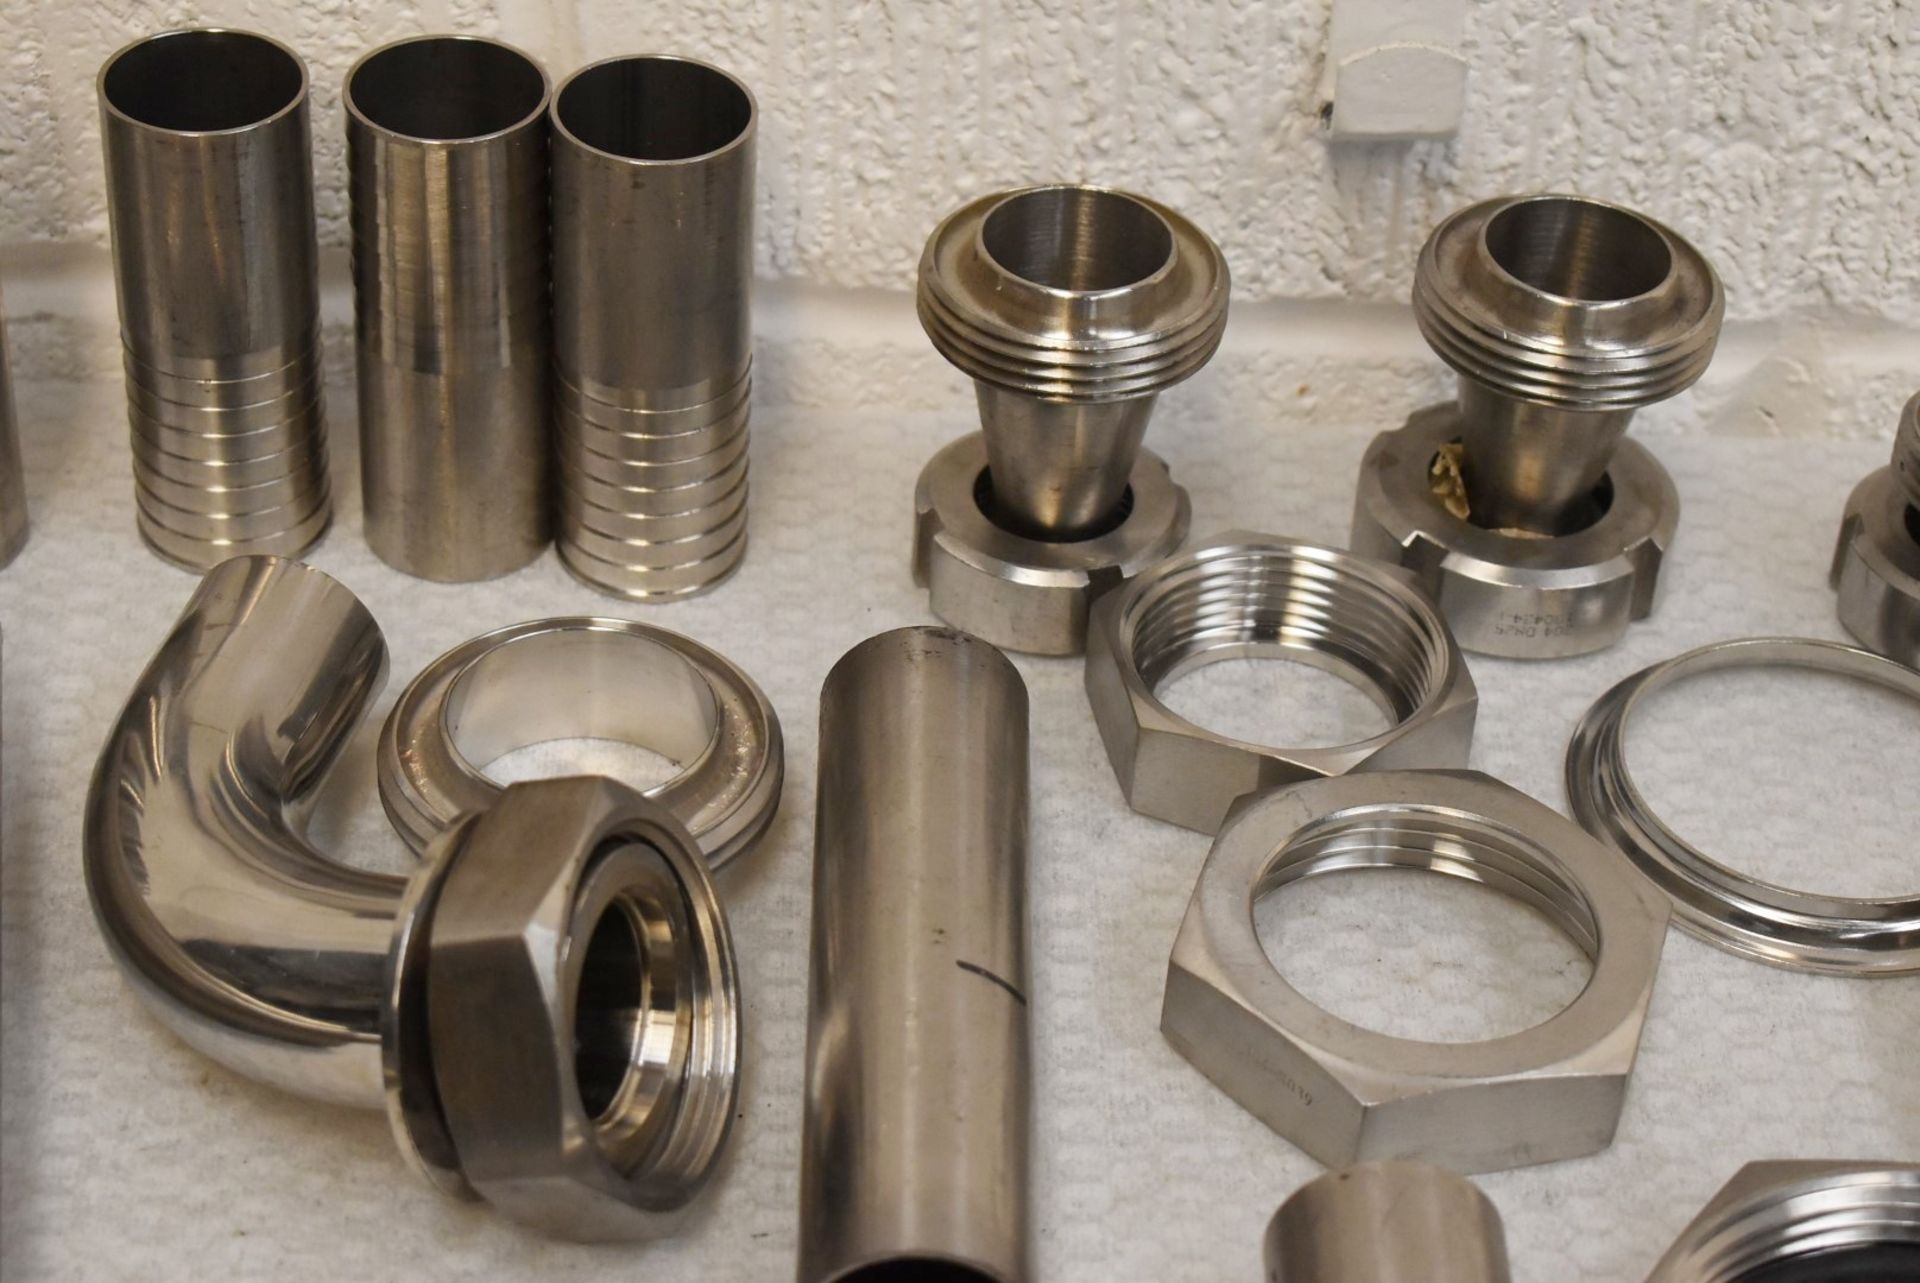 Assorted Job Lot of Stainless Steel Fittings For Brewery Equipment - Includes Approx 67 Pieces - - Image 5 of 16